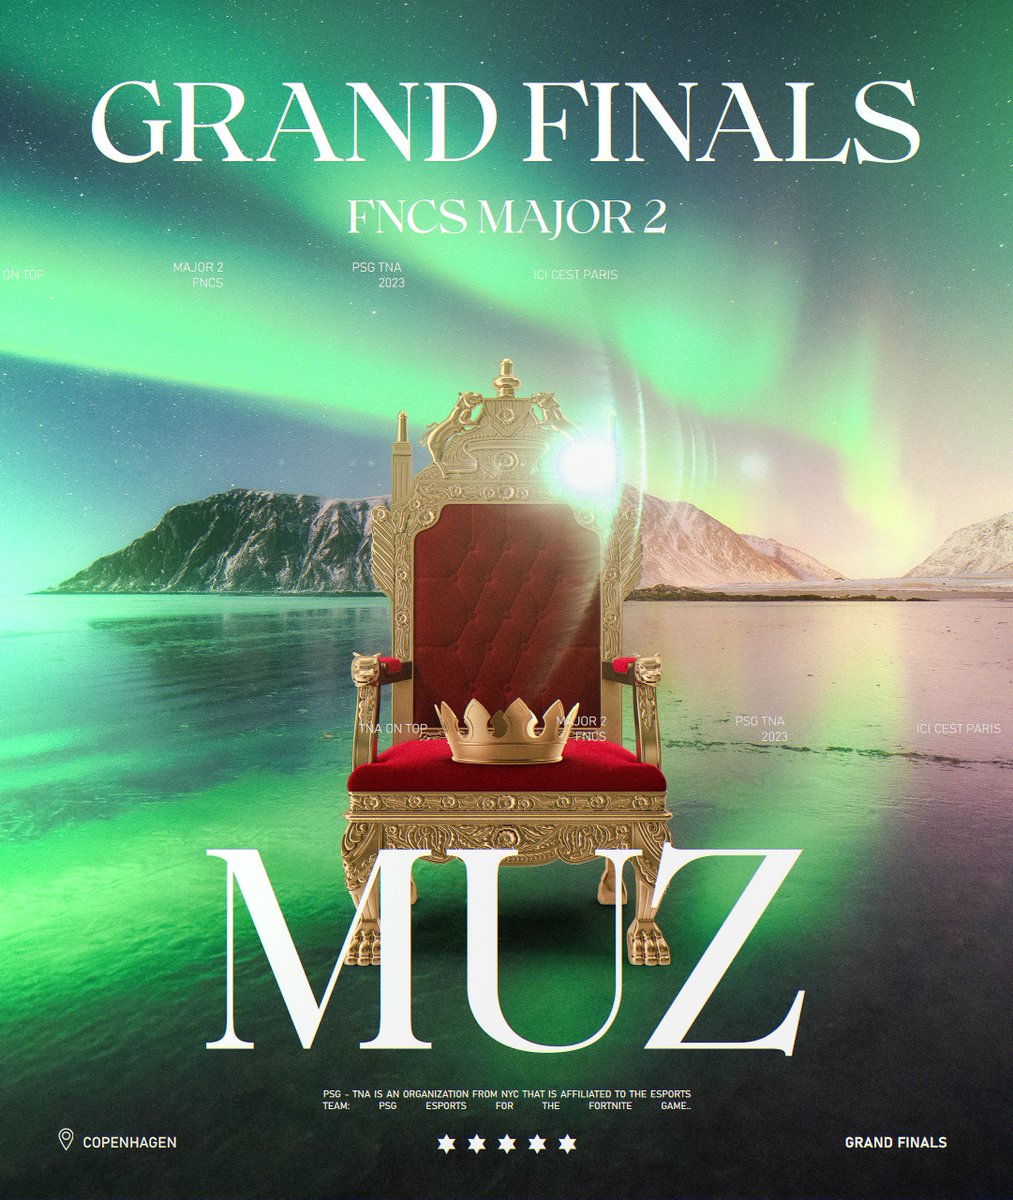 TIME TO RECLAIM THE THRONE 👑 Tonight @MuzFN will start his quest to become king of the region as he competes in the FNCS Major 2 Finals! May fortune favor you, warrior.